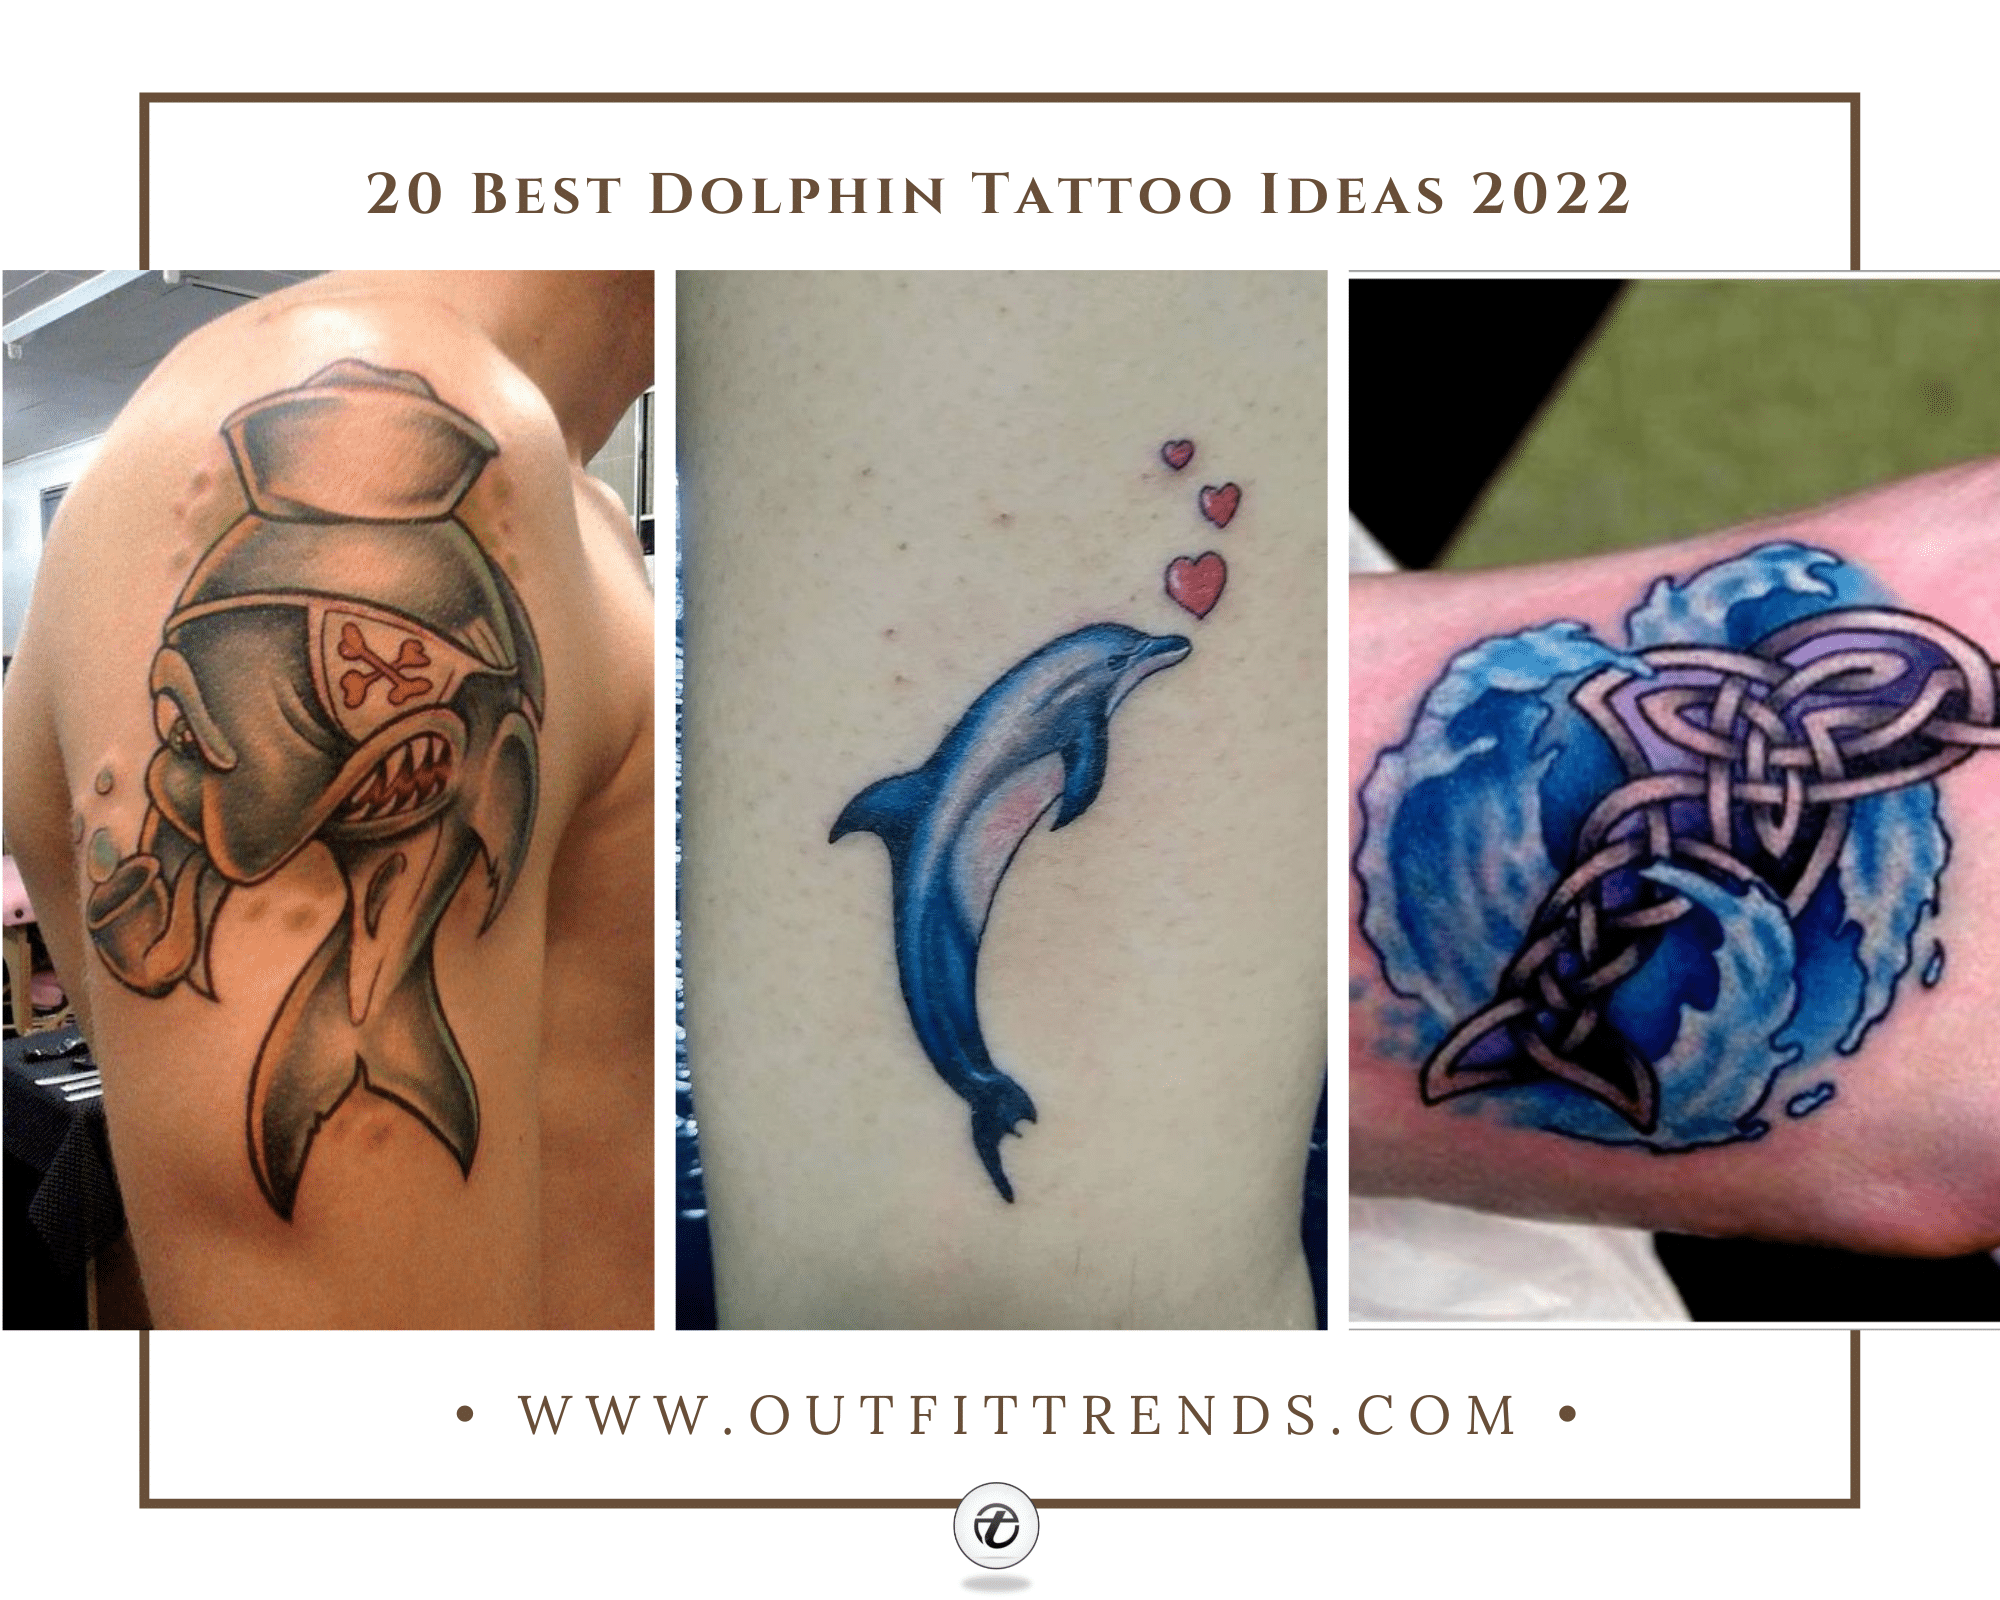 15 Best Dolphin Tattoos Designs with Meanings  FMagcom